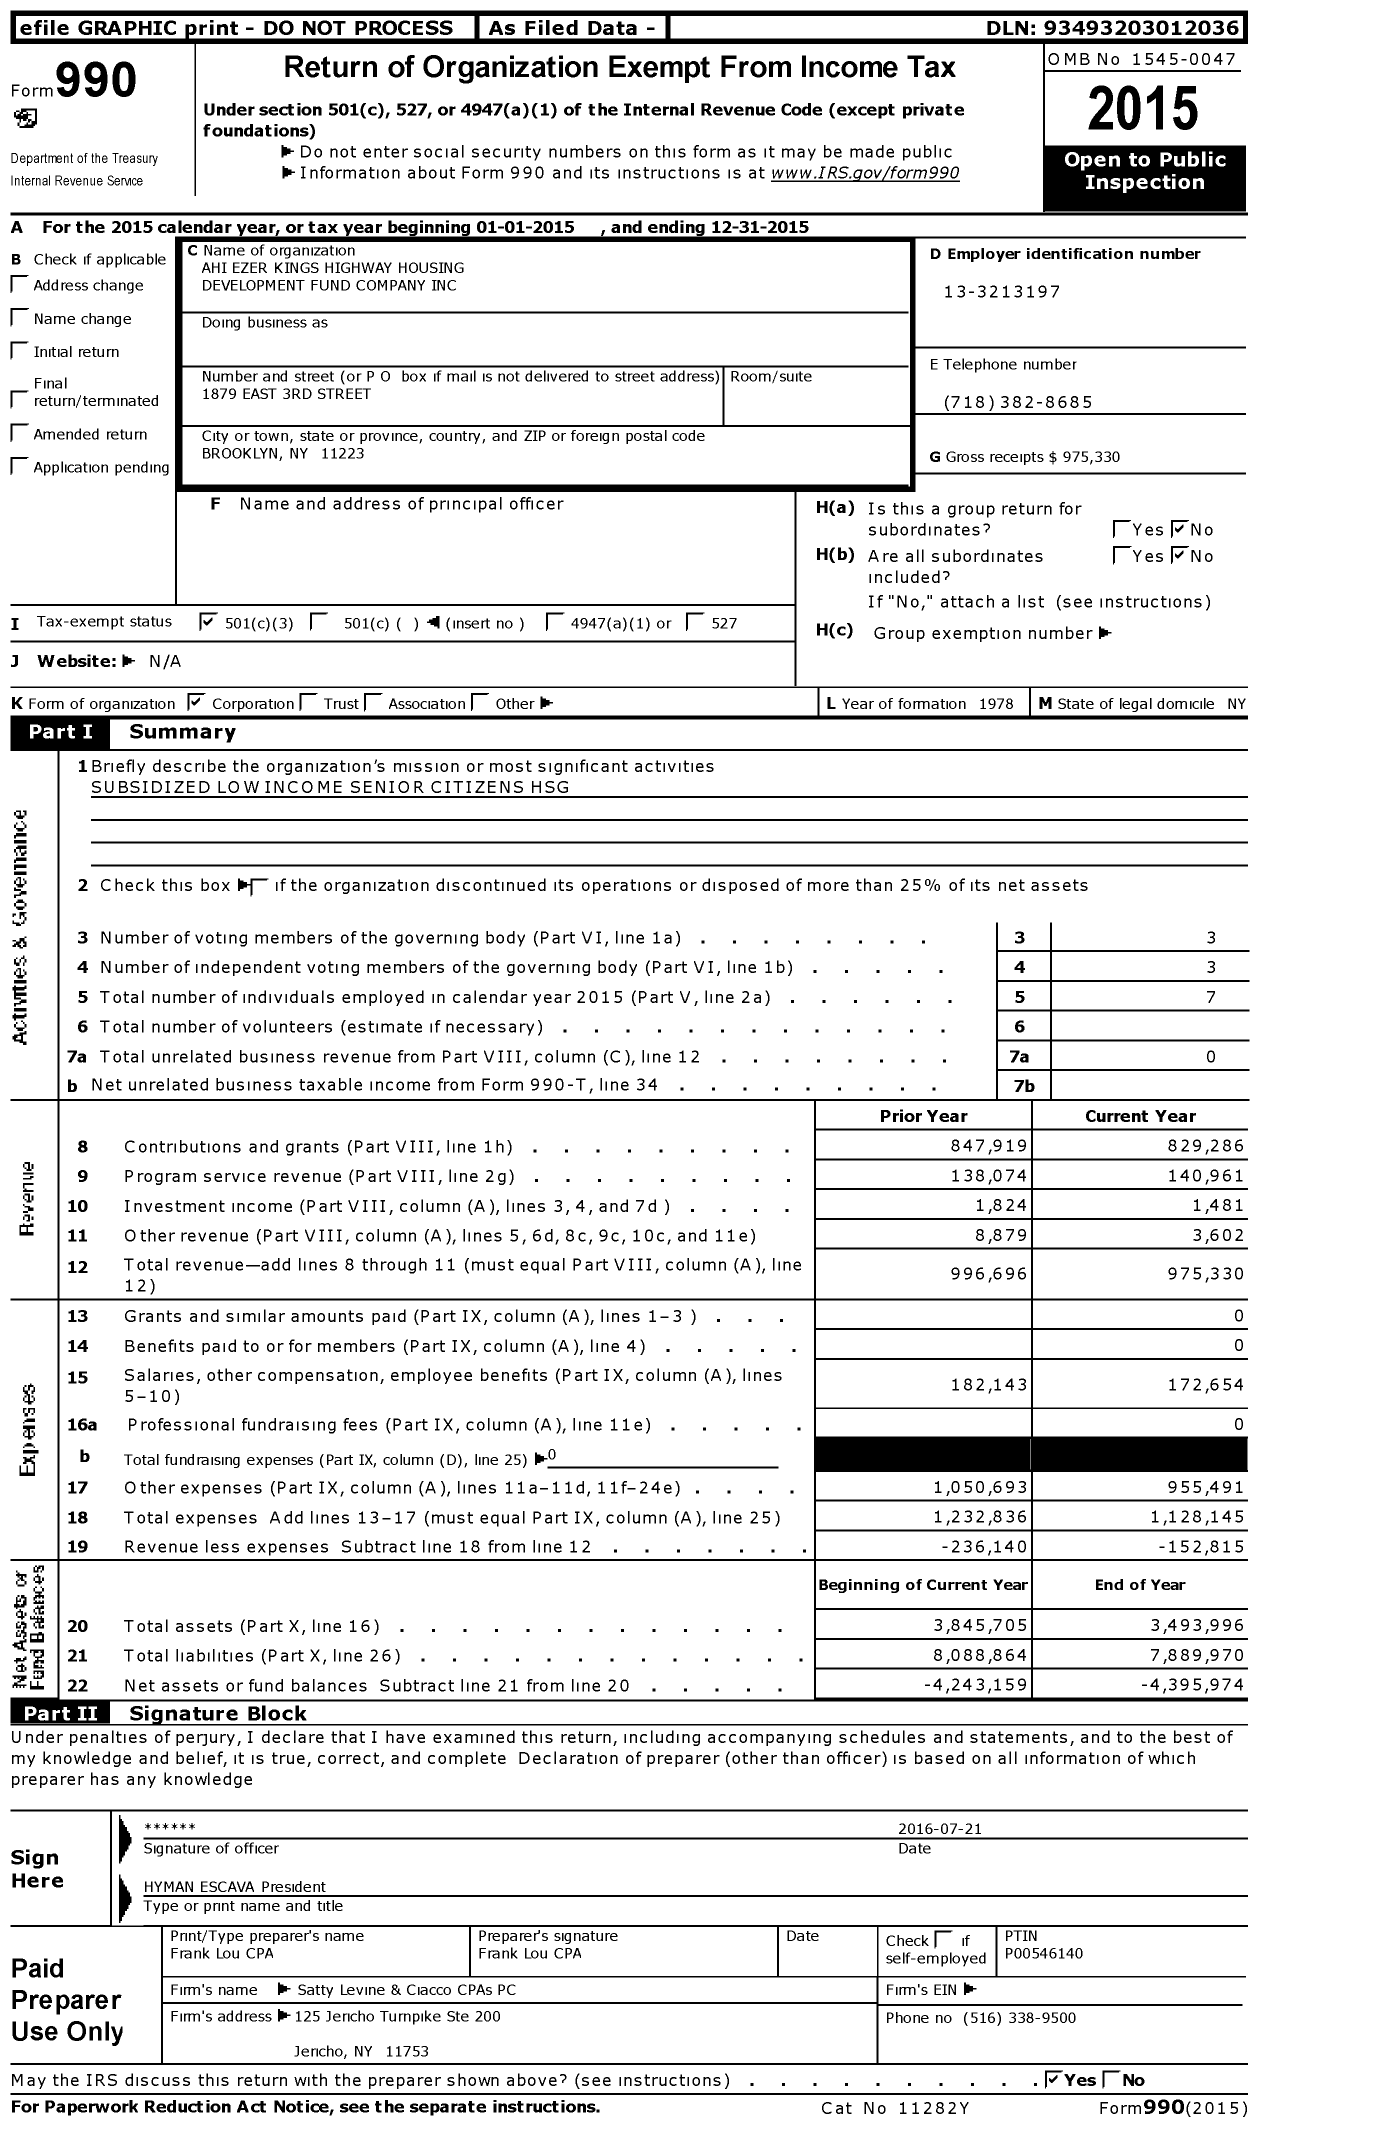 Image of first page of 2015 Form 990 for Ahi Ezer Kings Highway Housing Development Fund Company